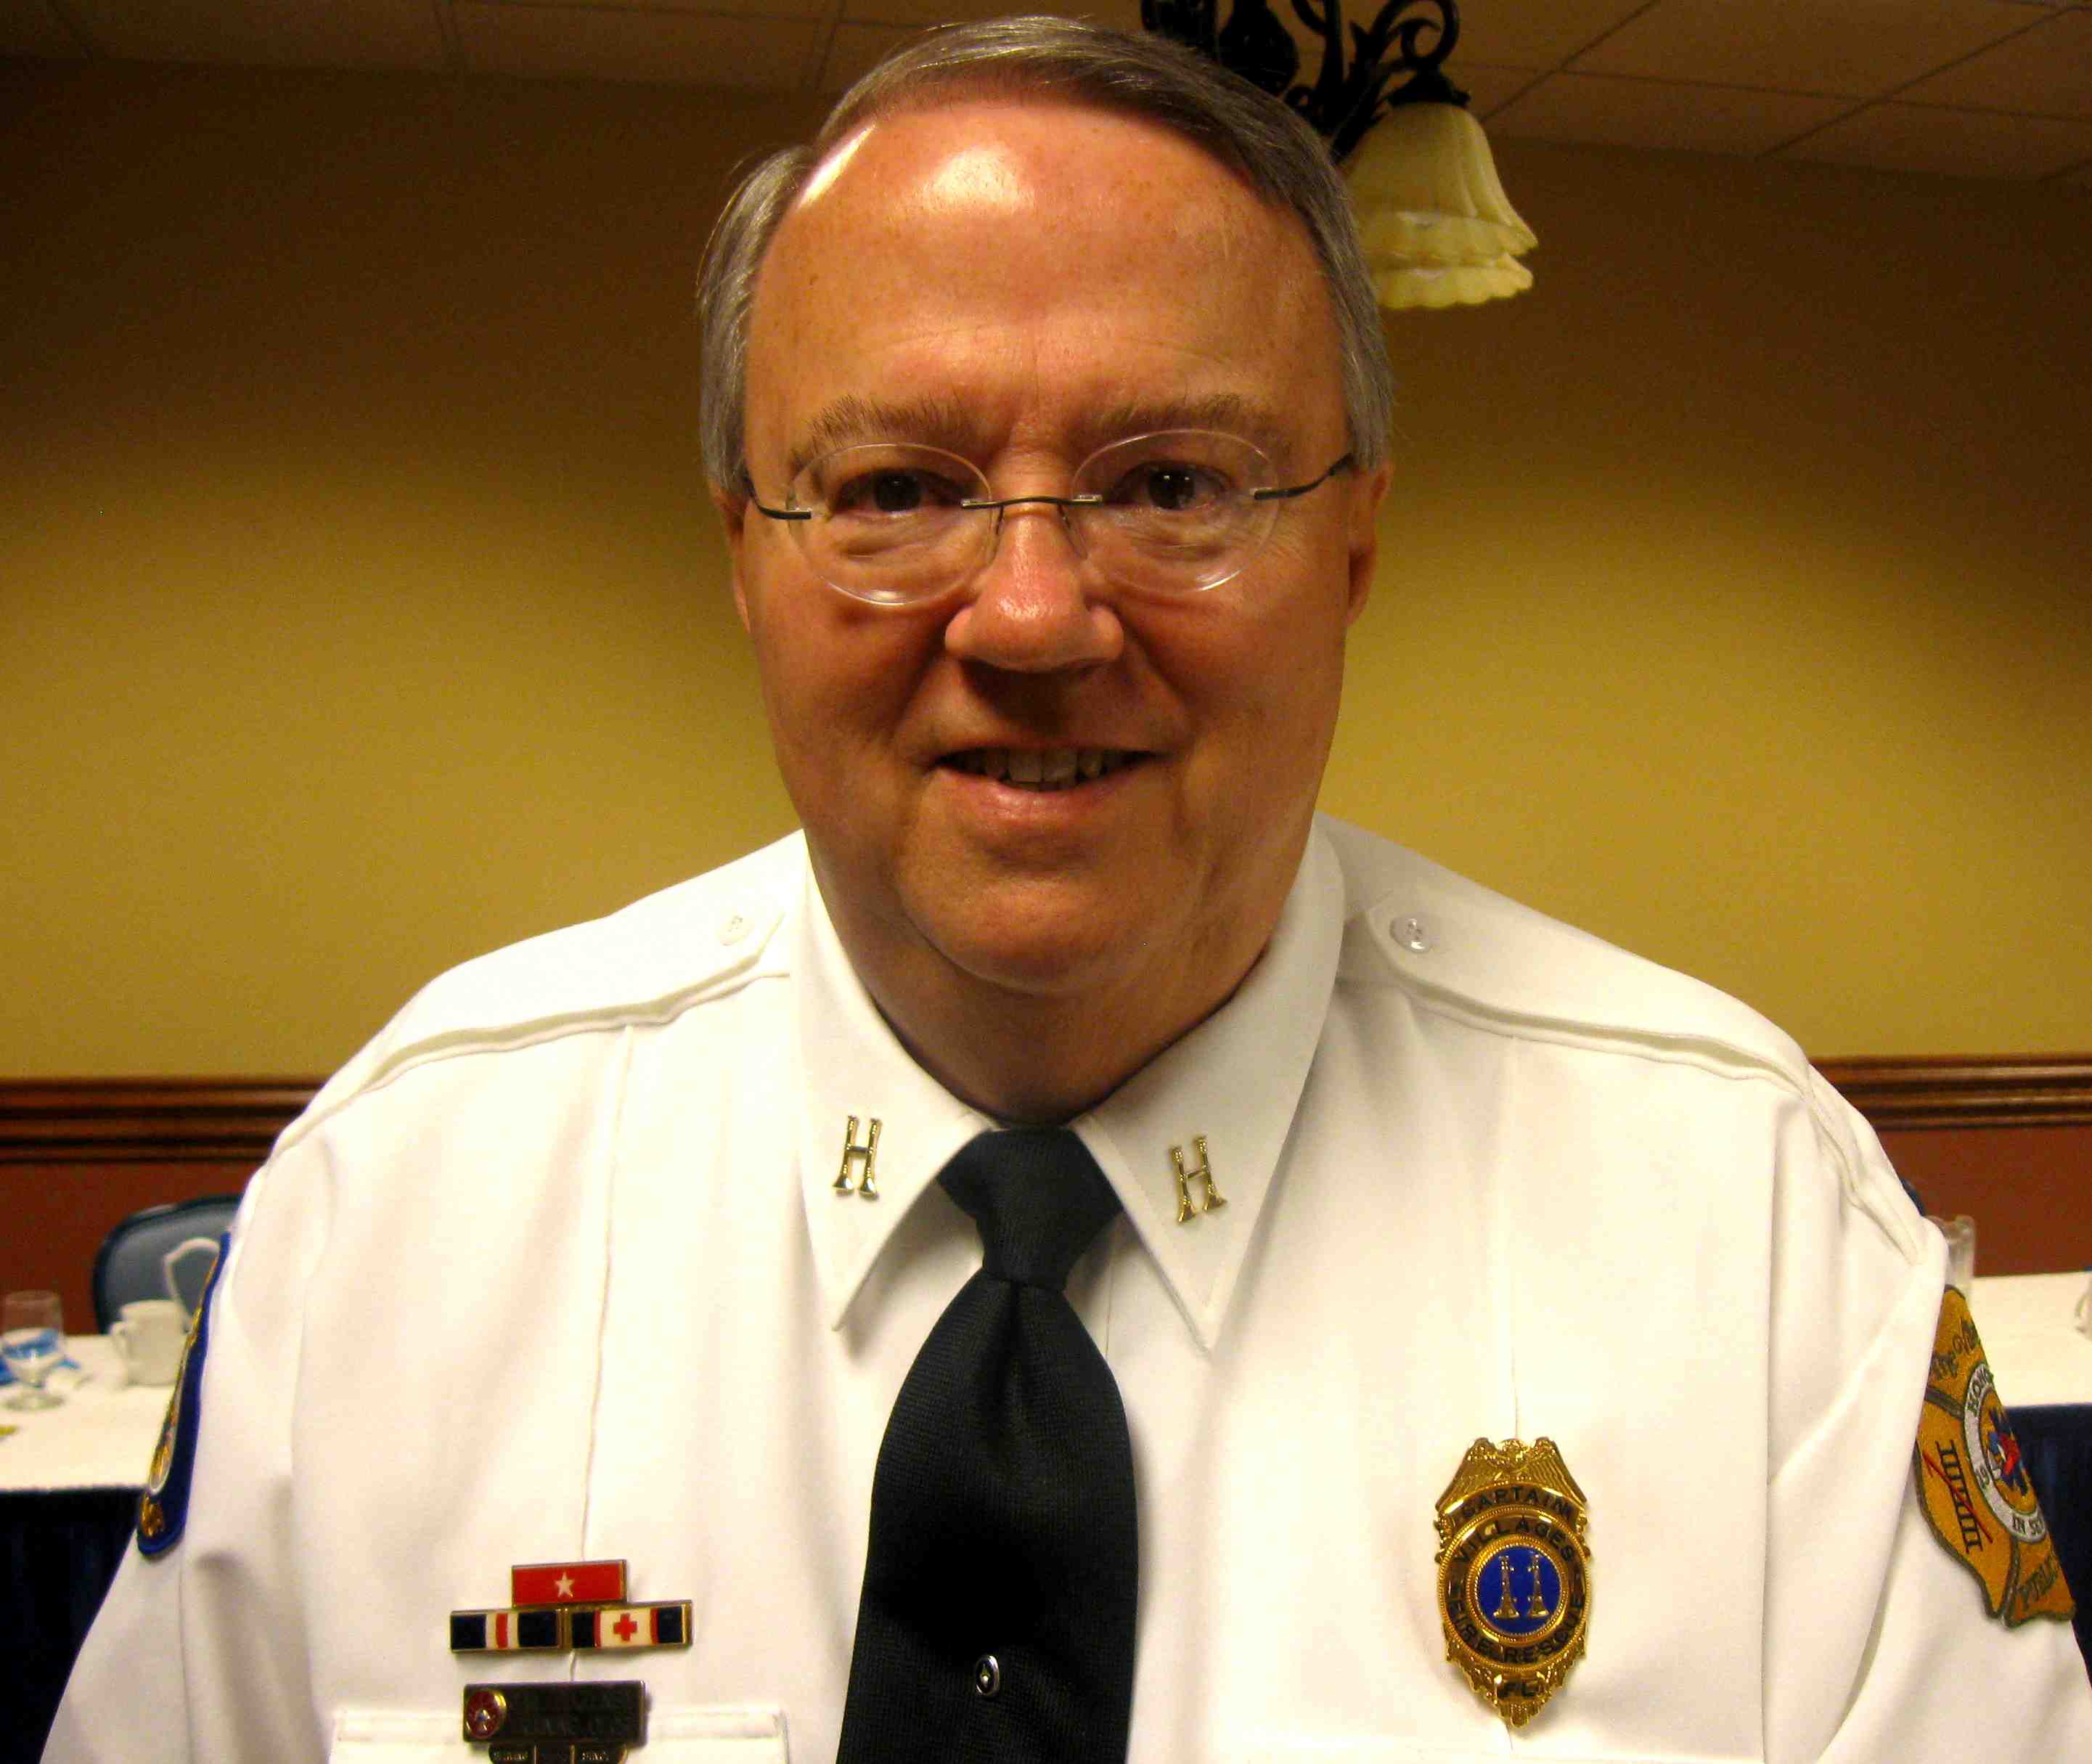 Retired Villages Public Safety captain among those to serve on ambulance committee